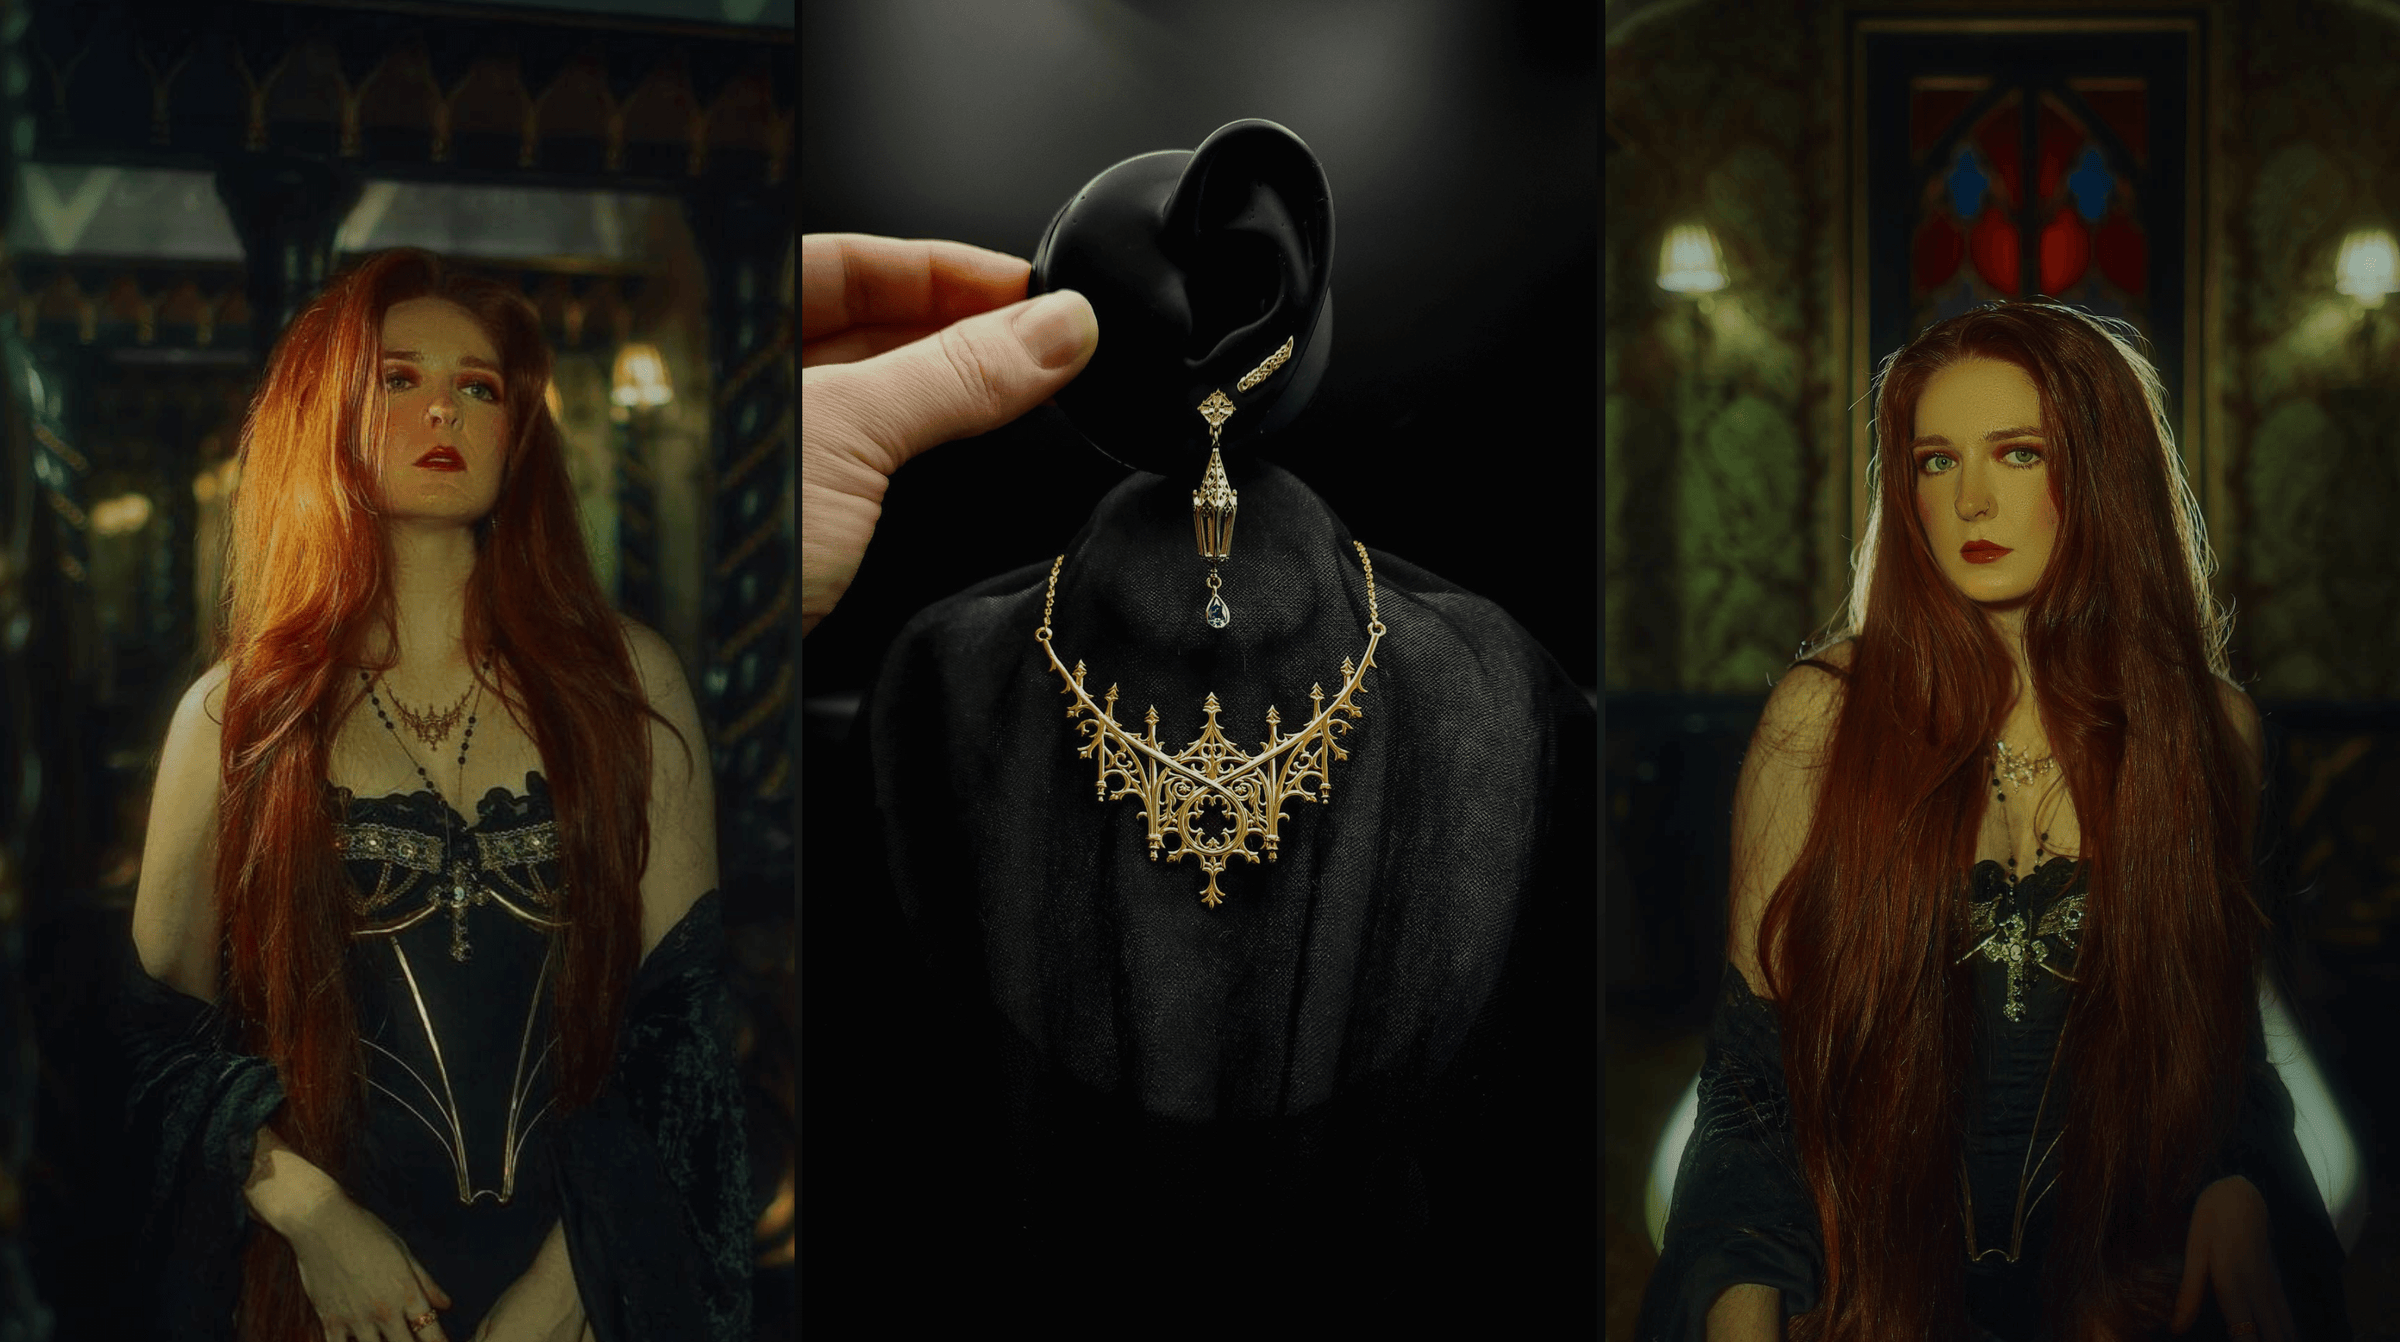 A stylish woman adorned with a Cathedral necklace